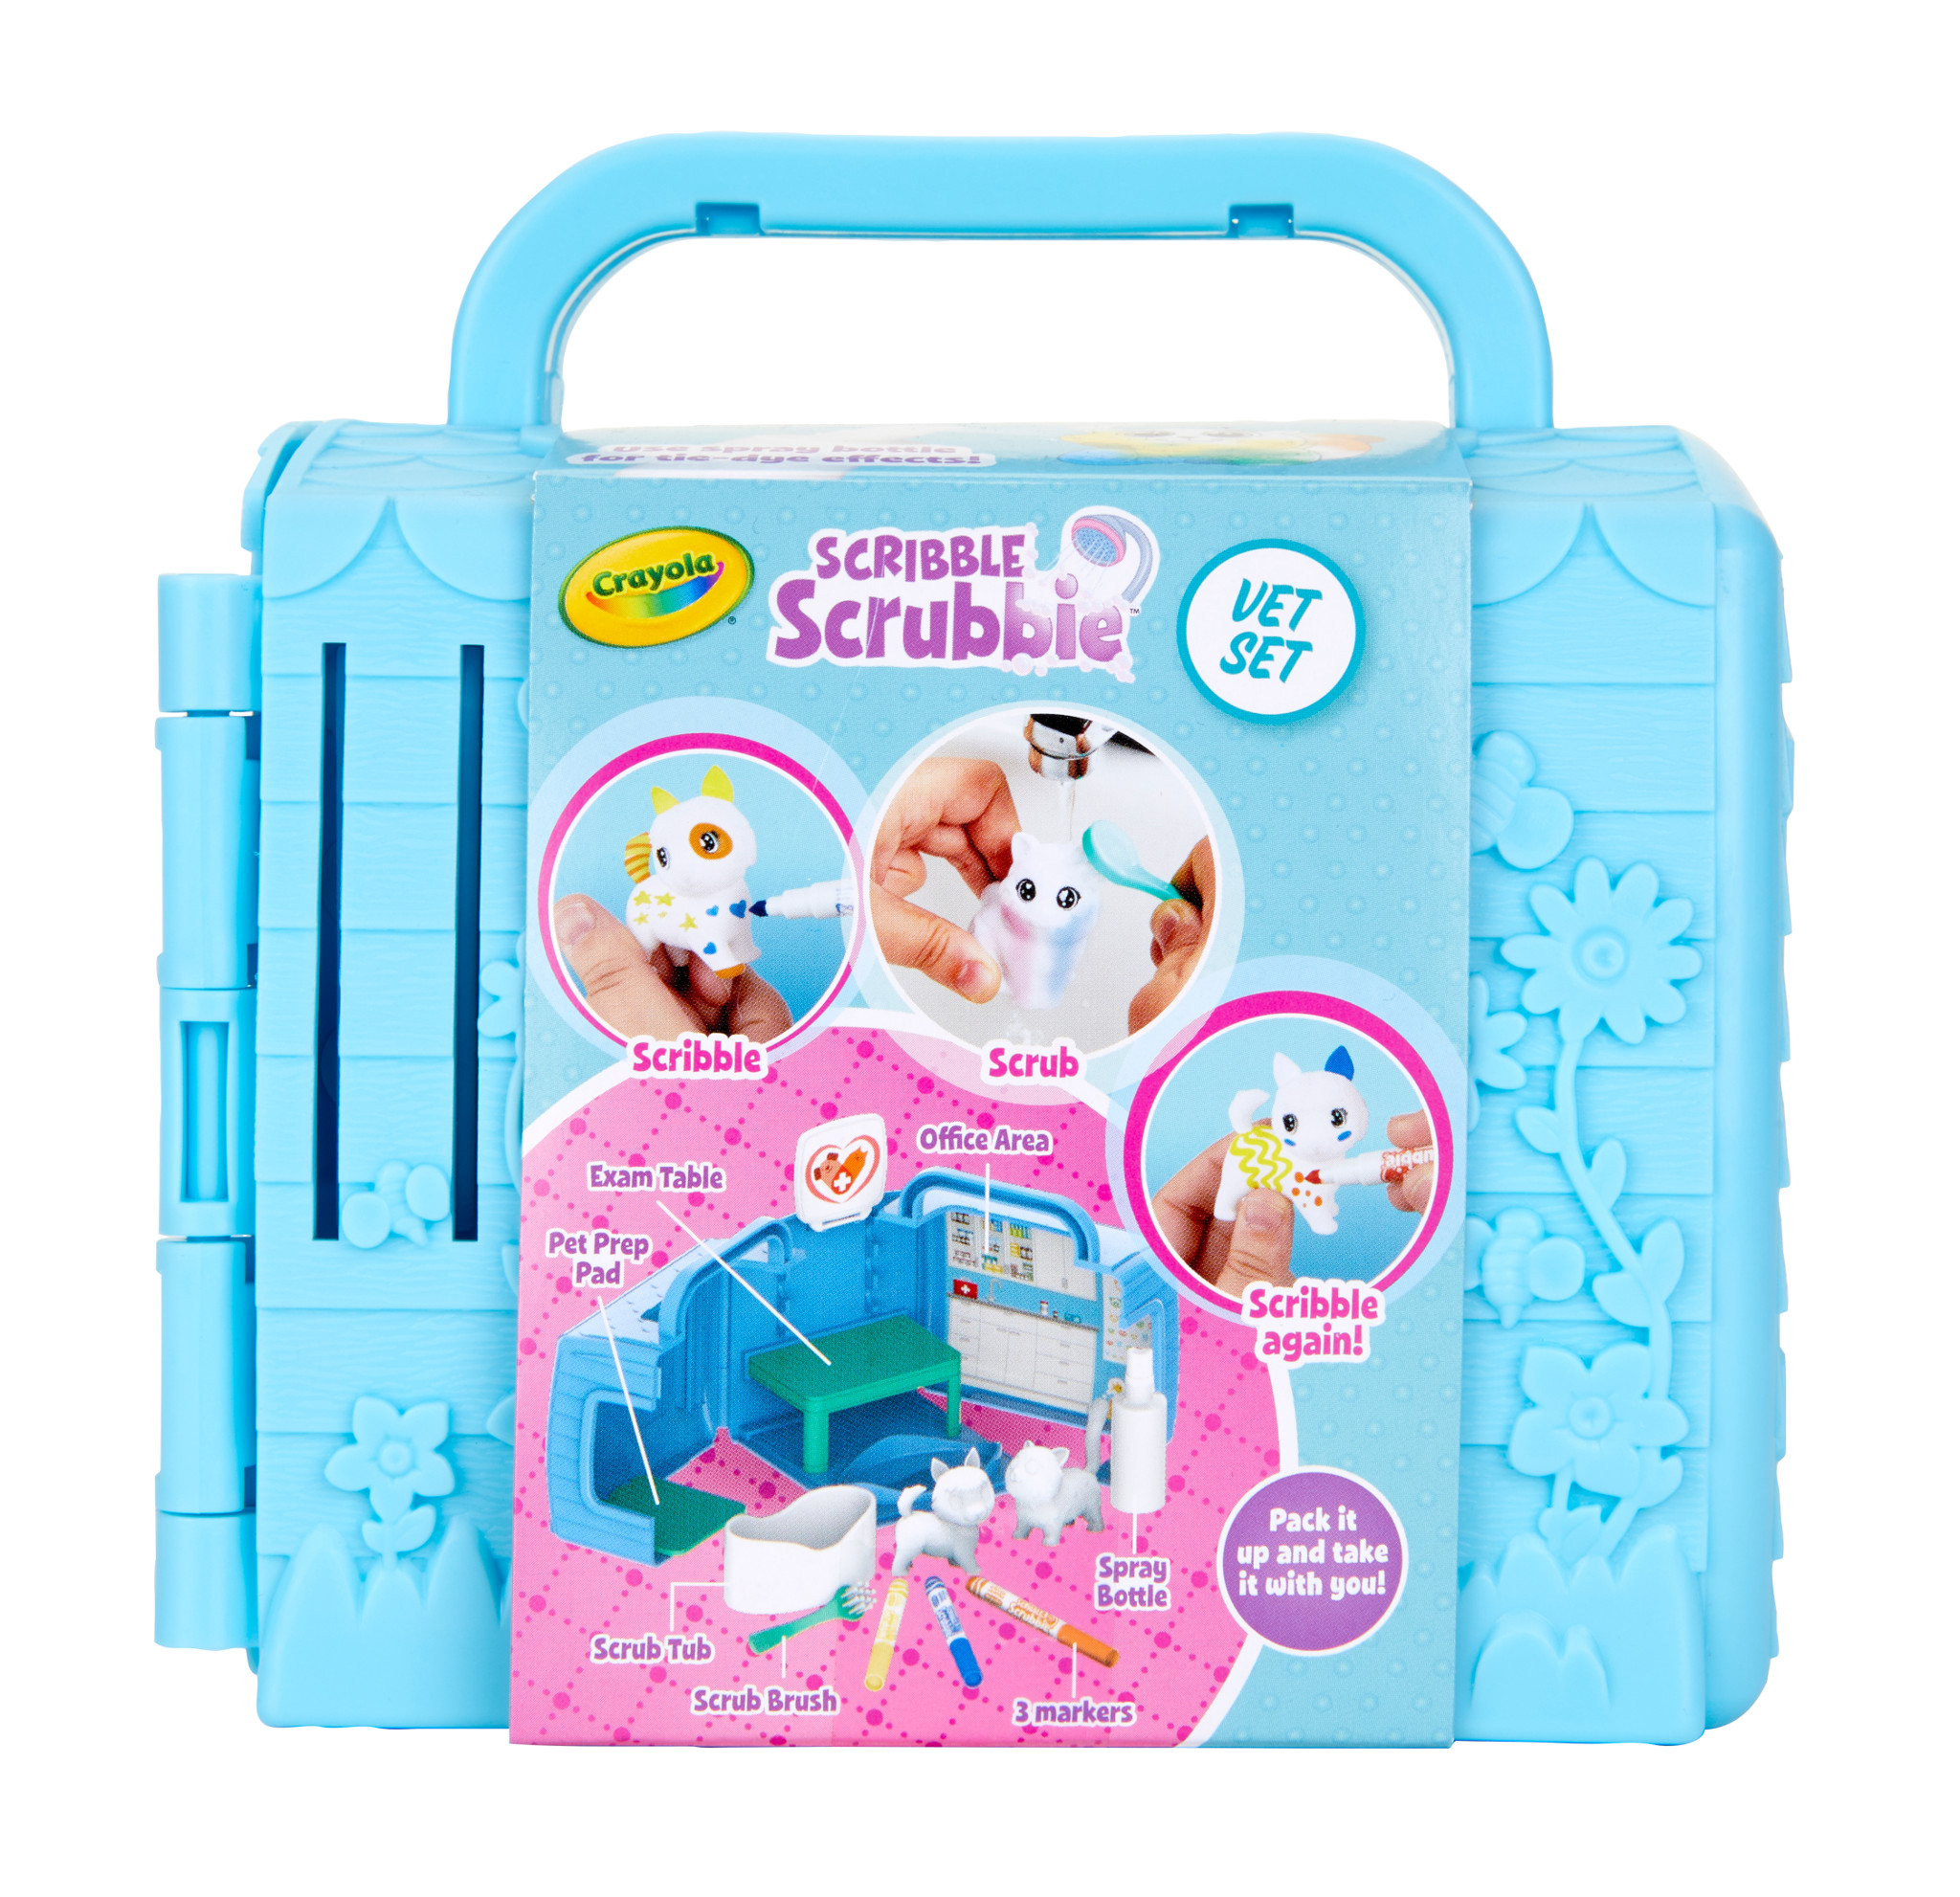 Crayola Scribble Scrubbie Pets Vet Set 6 Piece Set Boys and Girls Ages 3+ - image 3 of 9